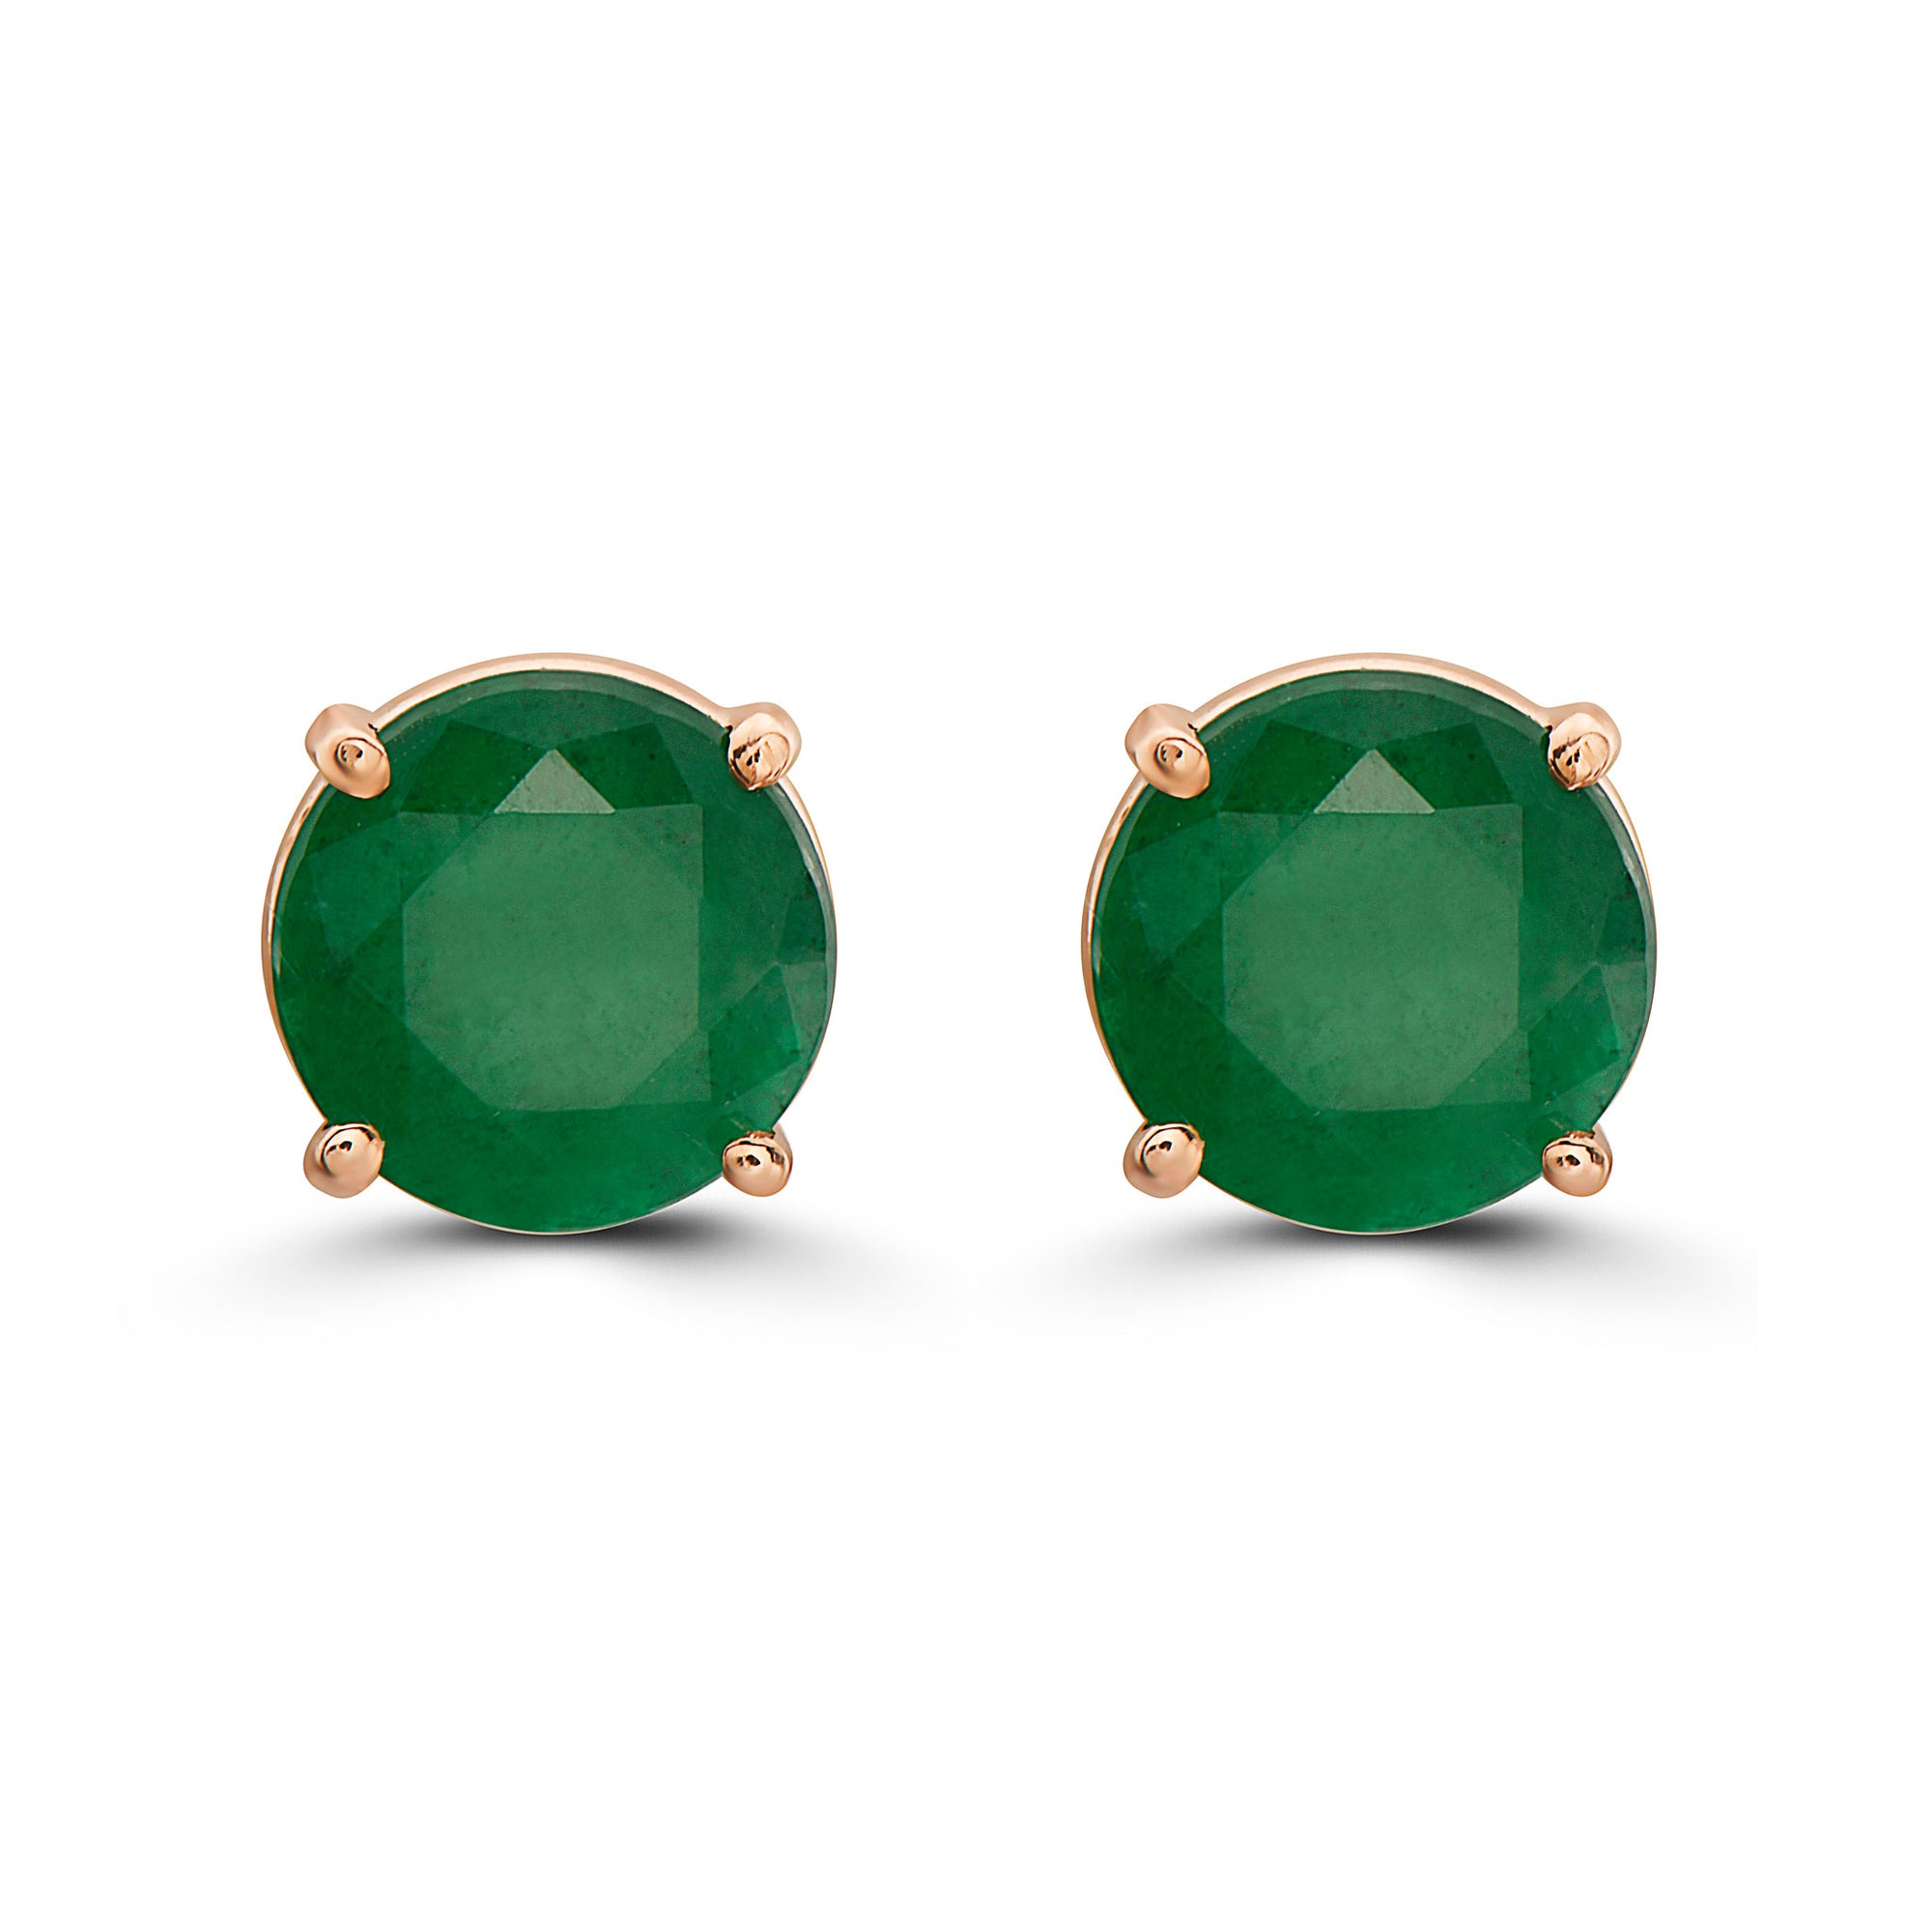 Birthstone Earrings 2 3/4 cts Classic Natural Green Emerald set in 14K Rose Gold